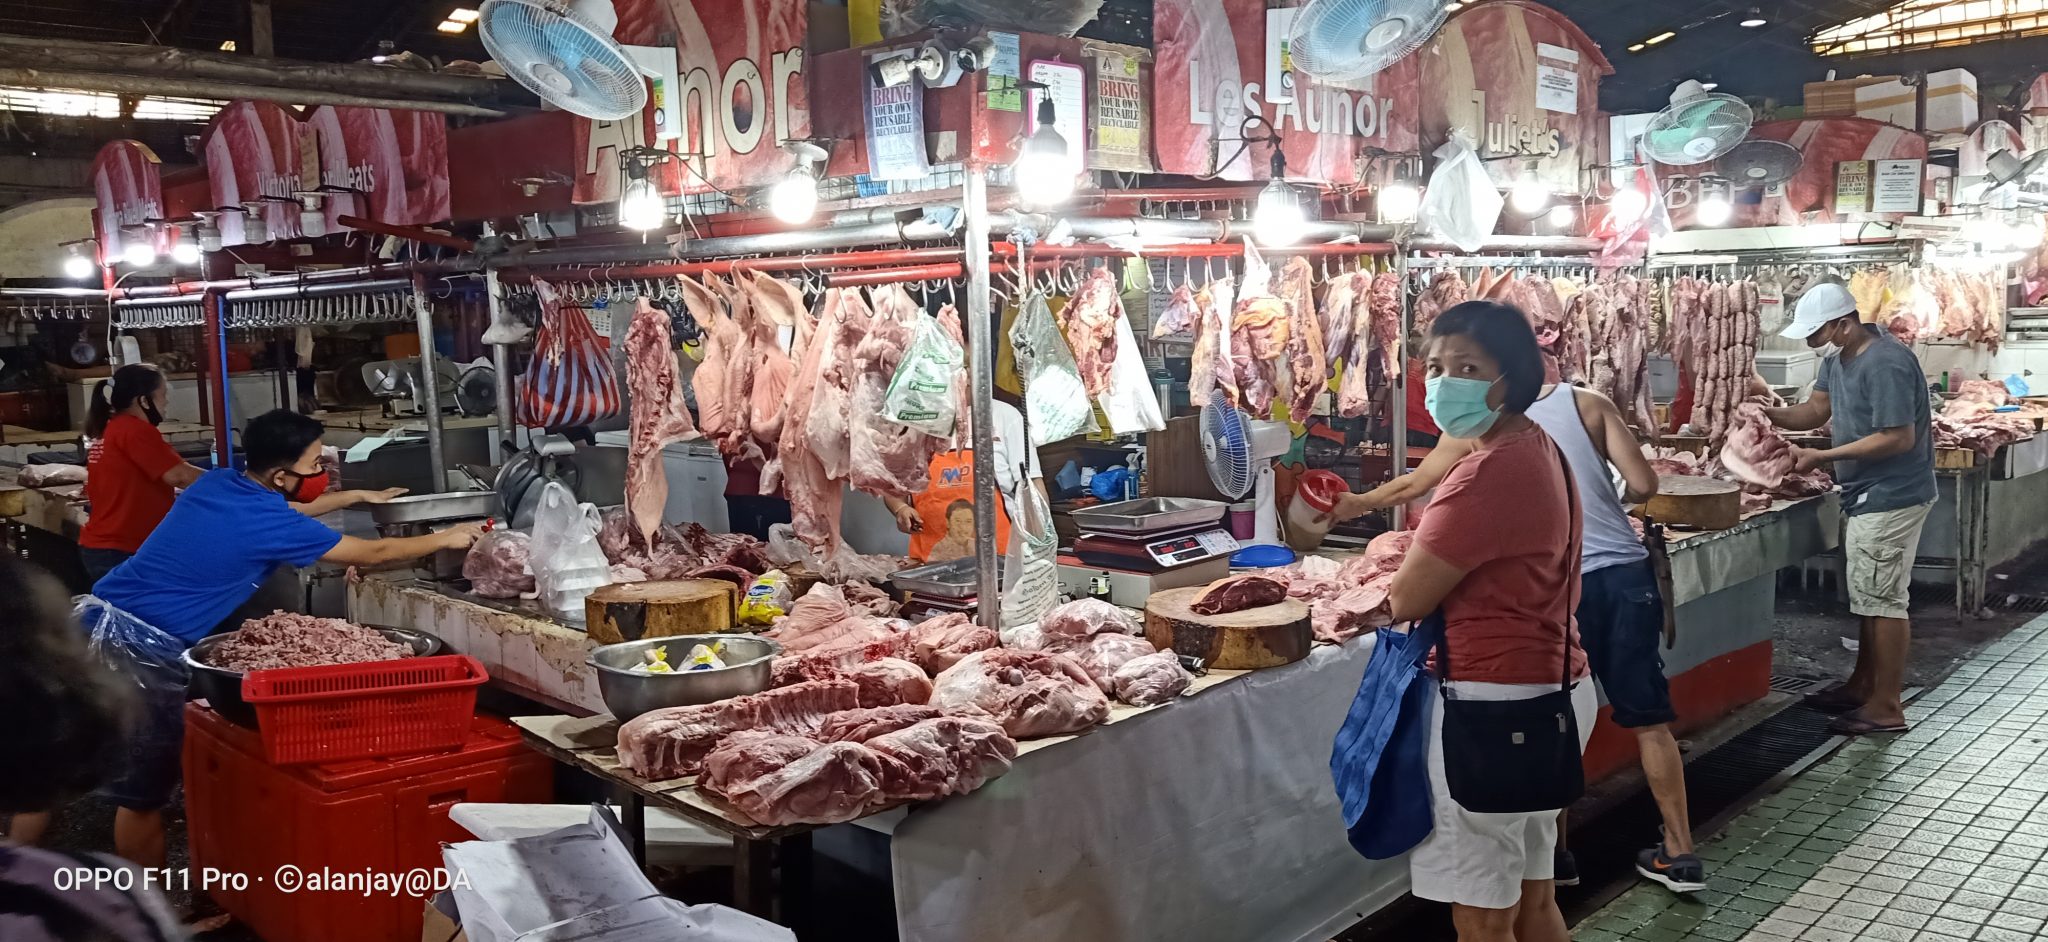 Phl meat industry remains stable amid Covid-19